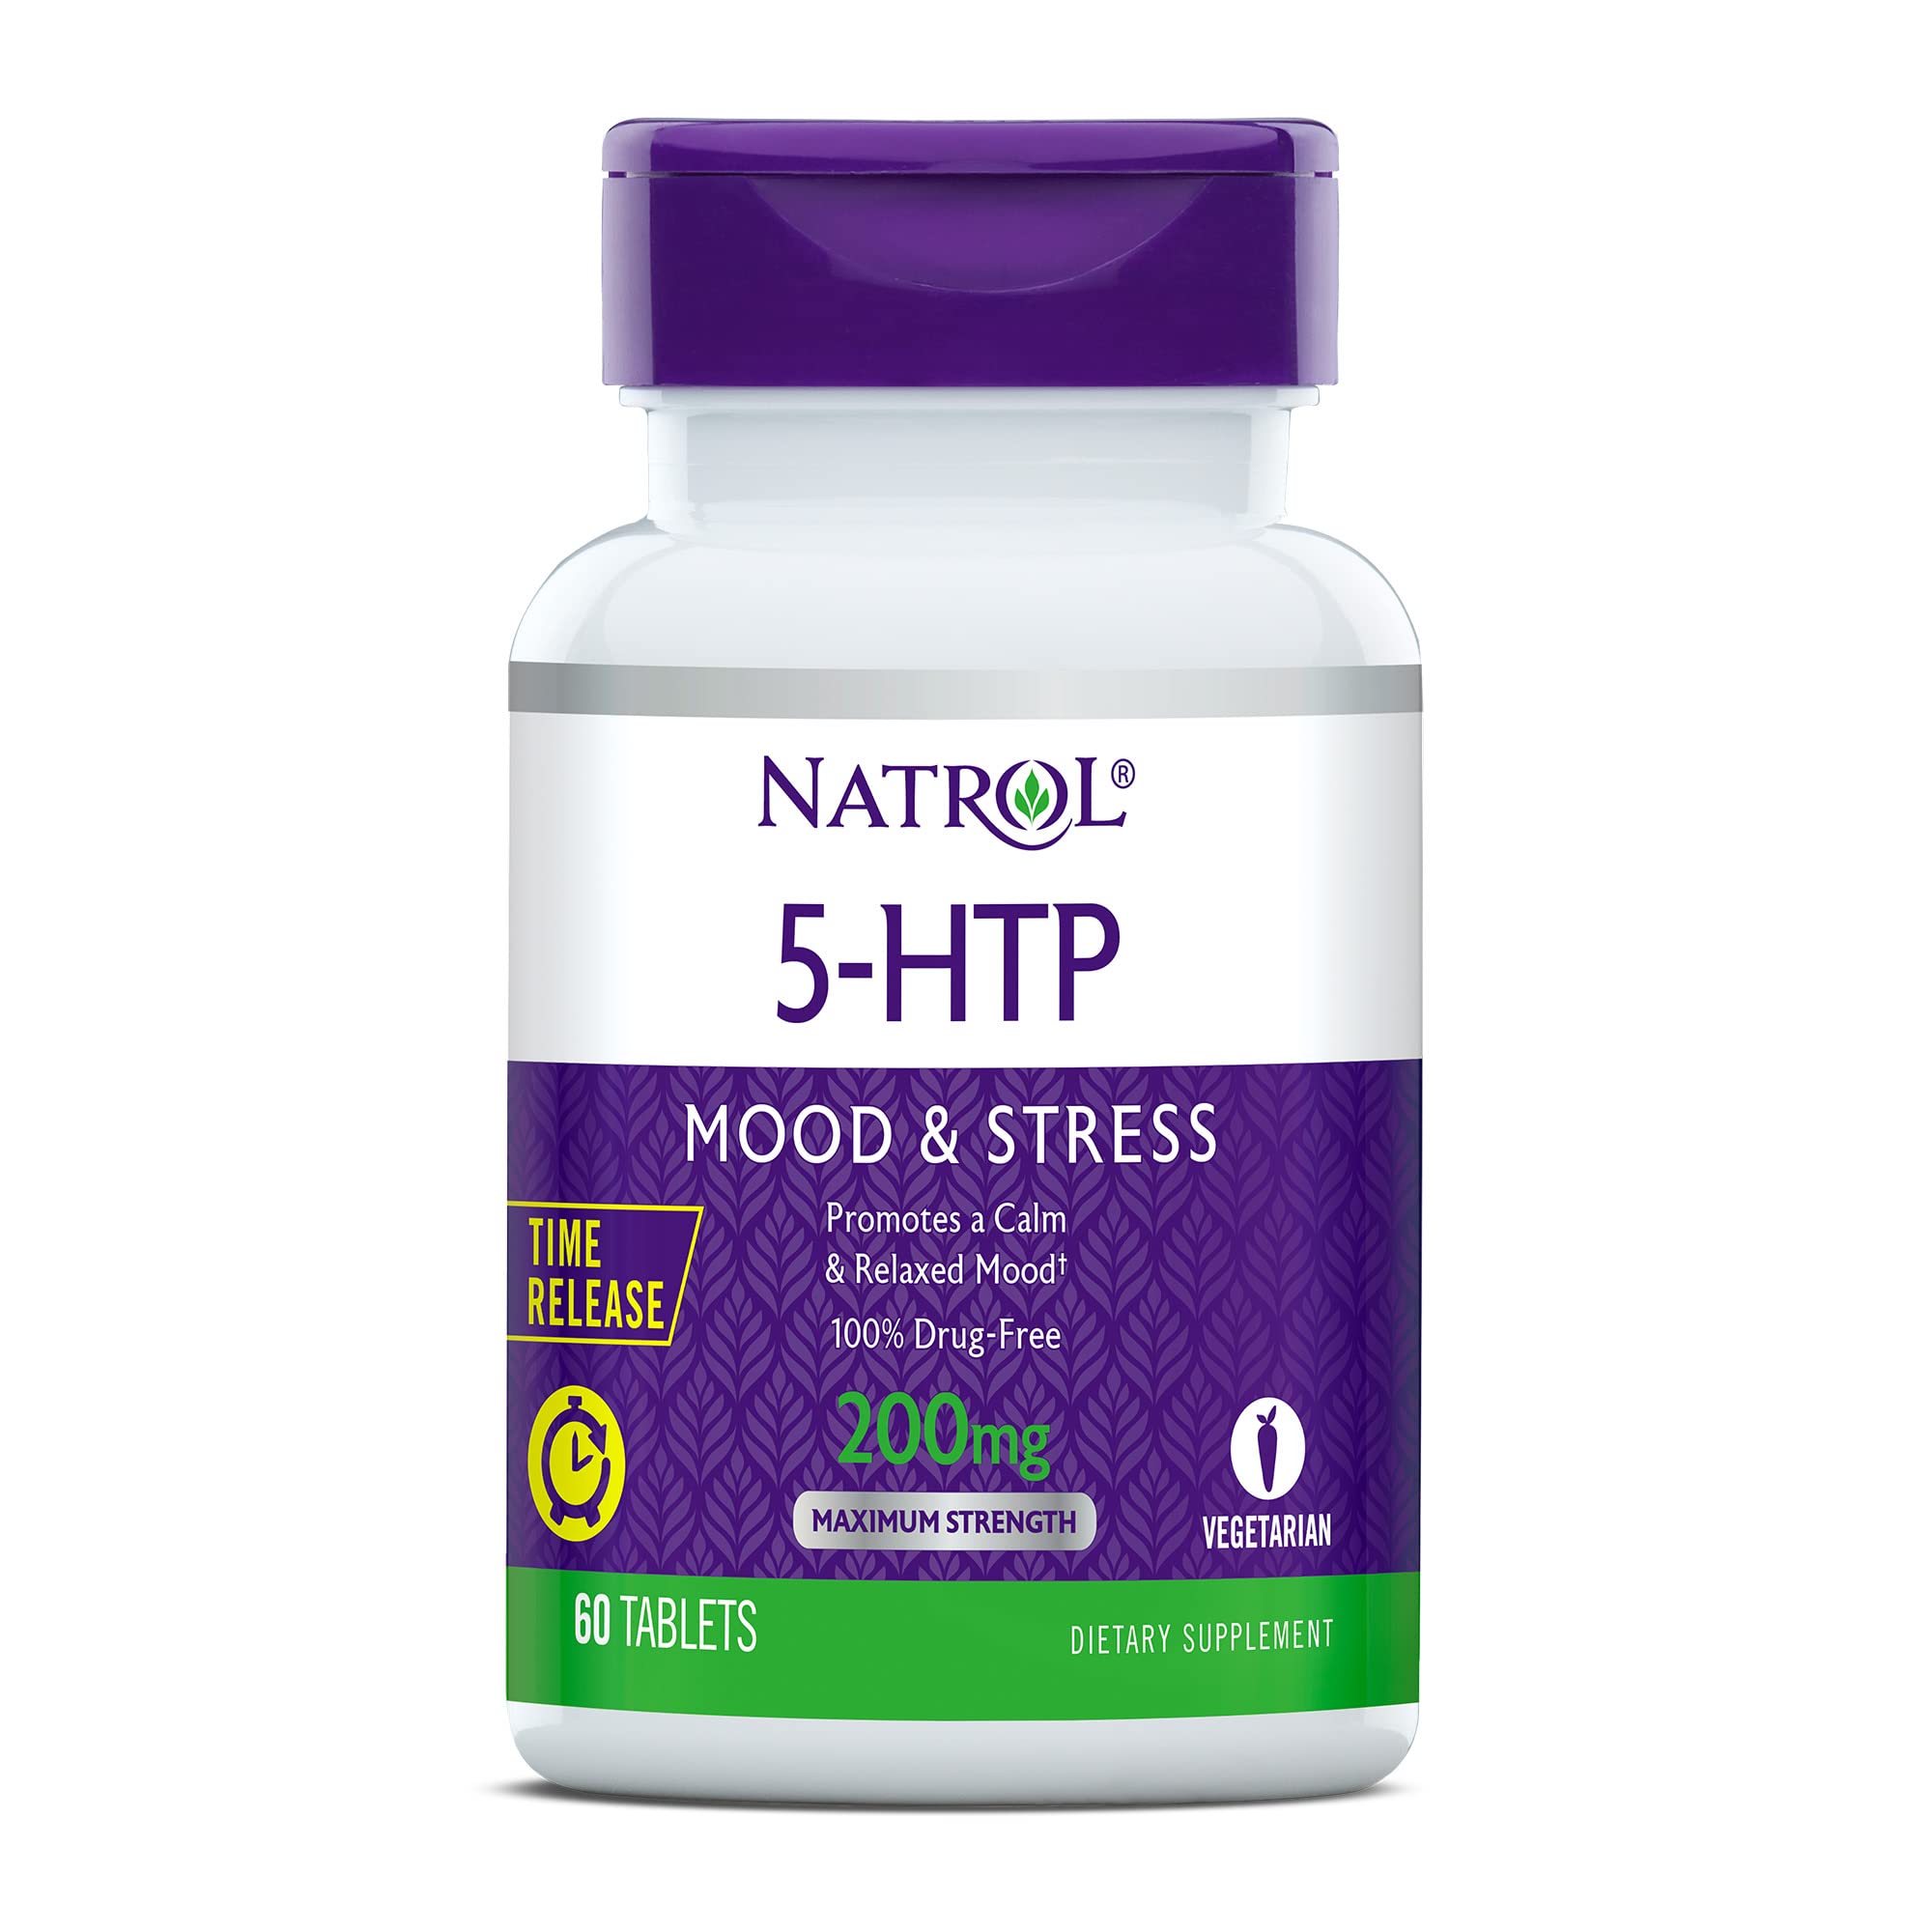 Natrol 5-HTP 200 mg Time Release Tablets, 60 Servings, Dietary Supplement, Promotes a Calm, Relaxed Mood, Controlled Release, Drug Free, Vegetarian